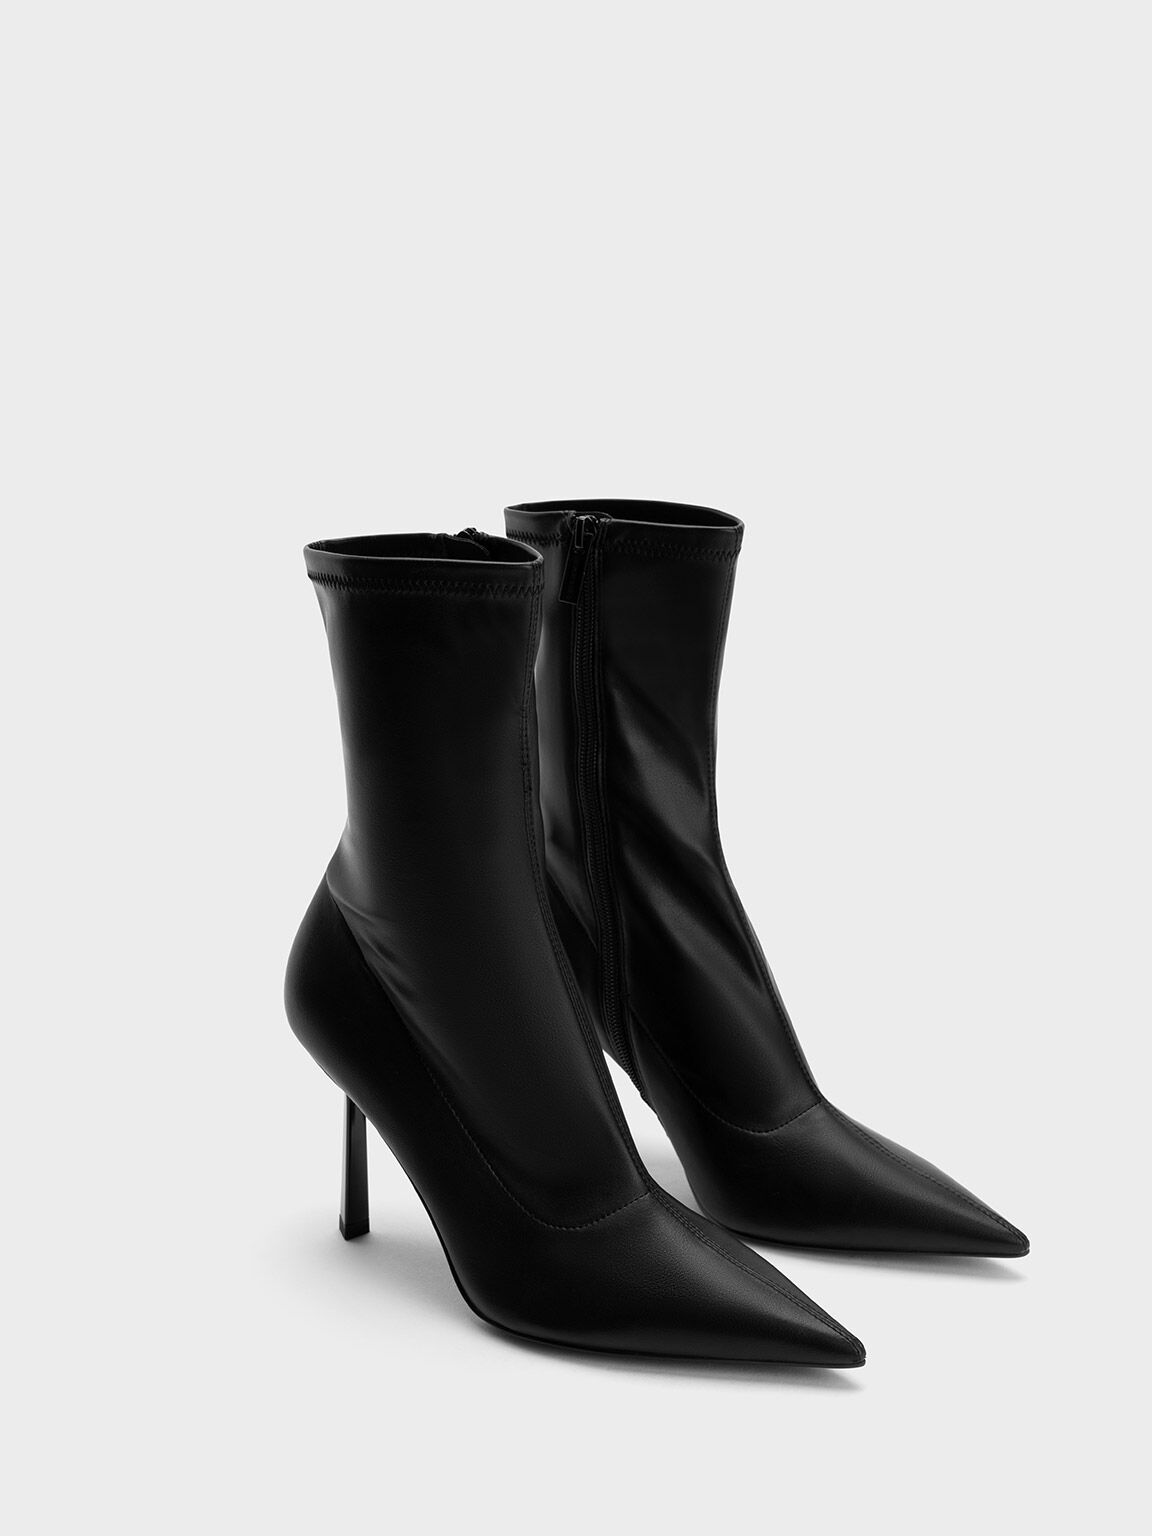 Black Pointed-Toe Stiletto Heel Ankle Boots - CHARLES & KEITH US